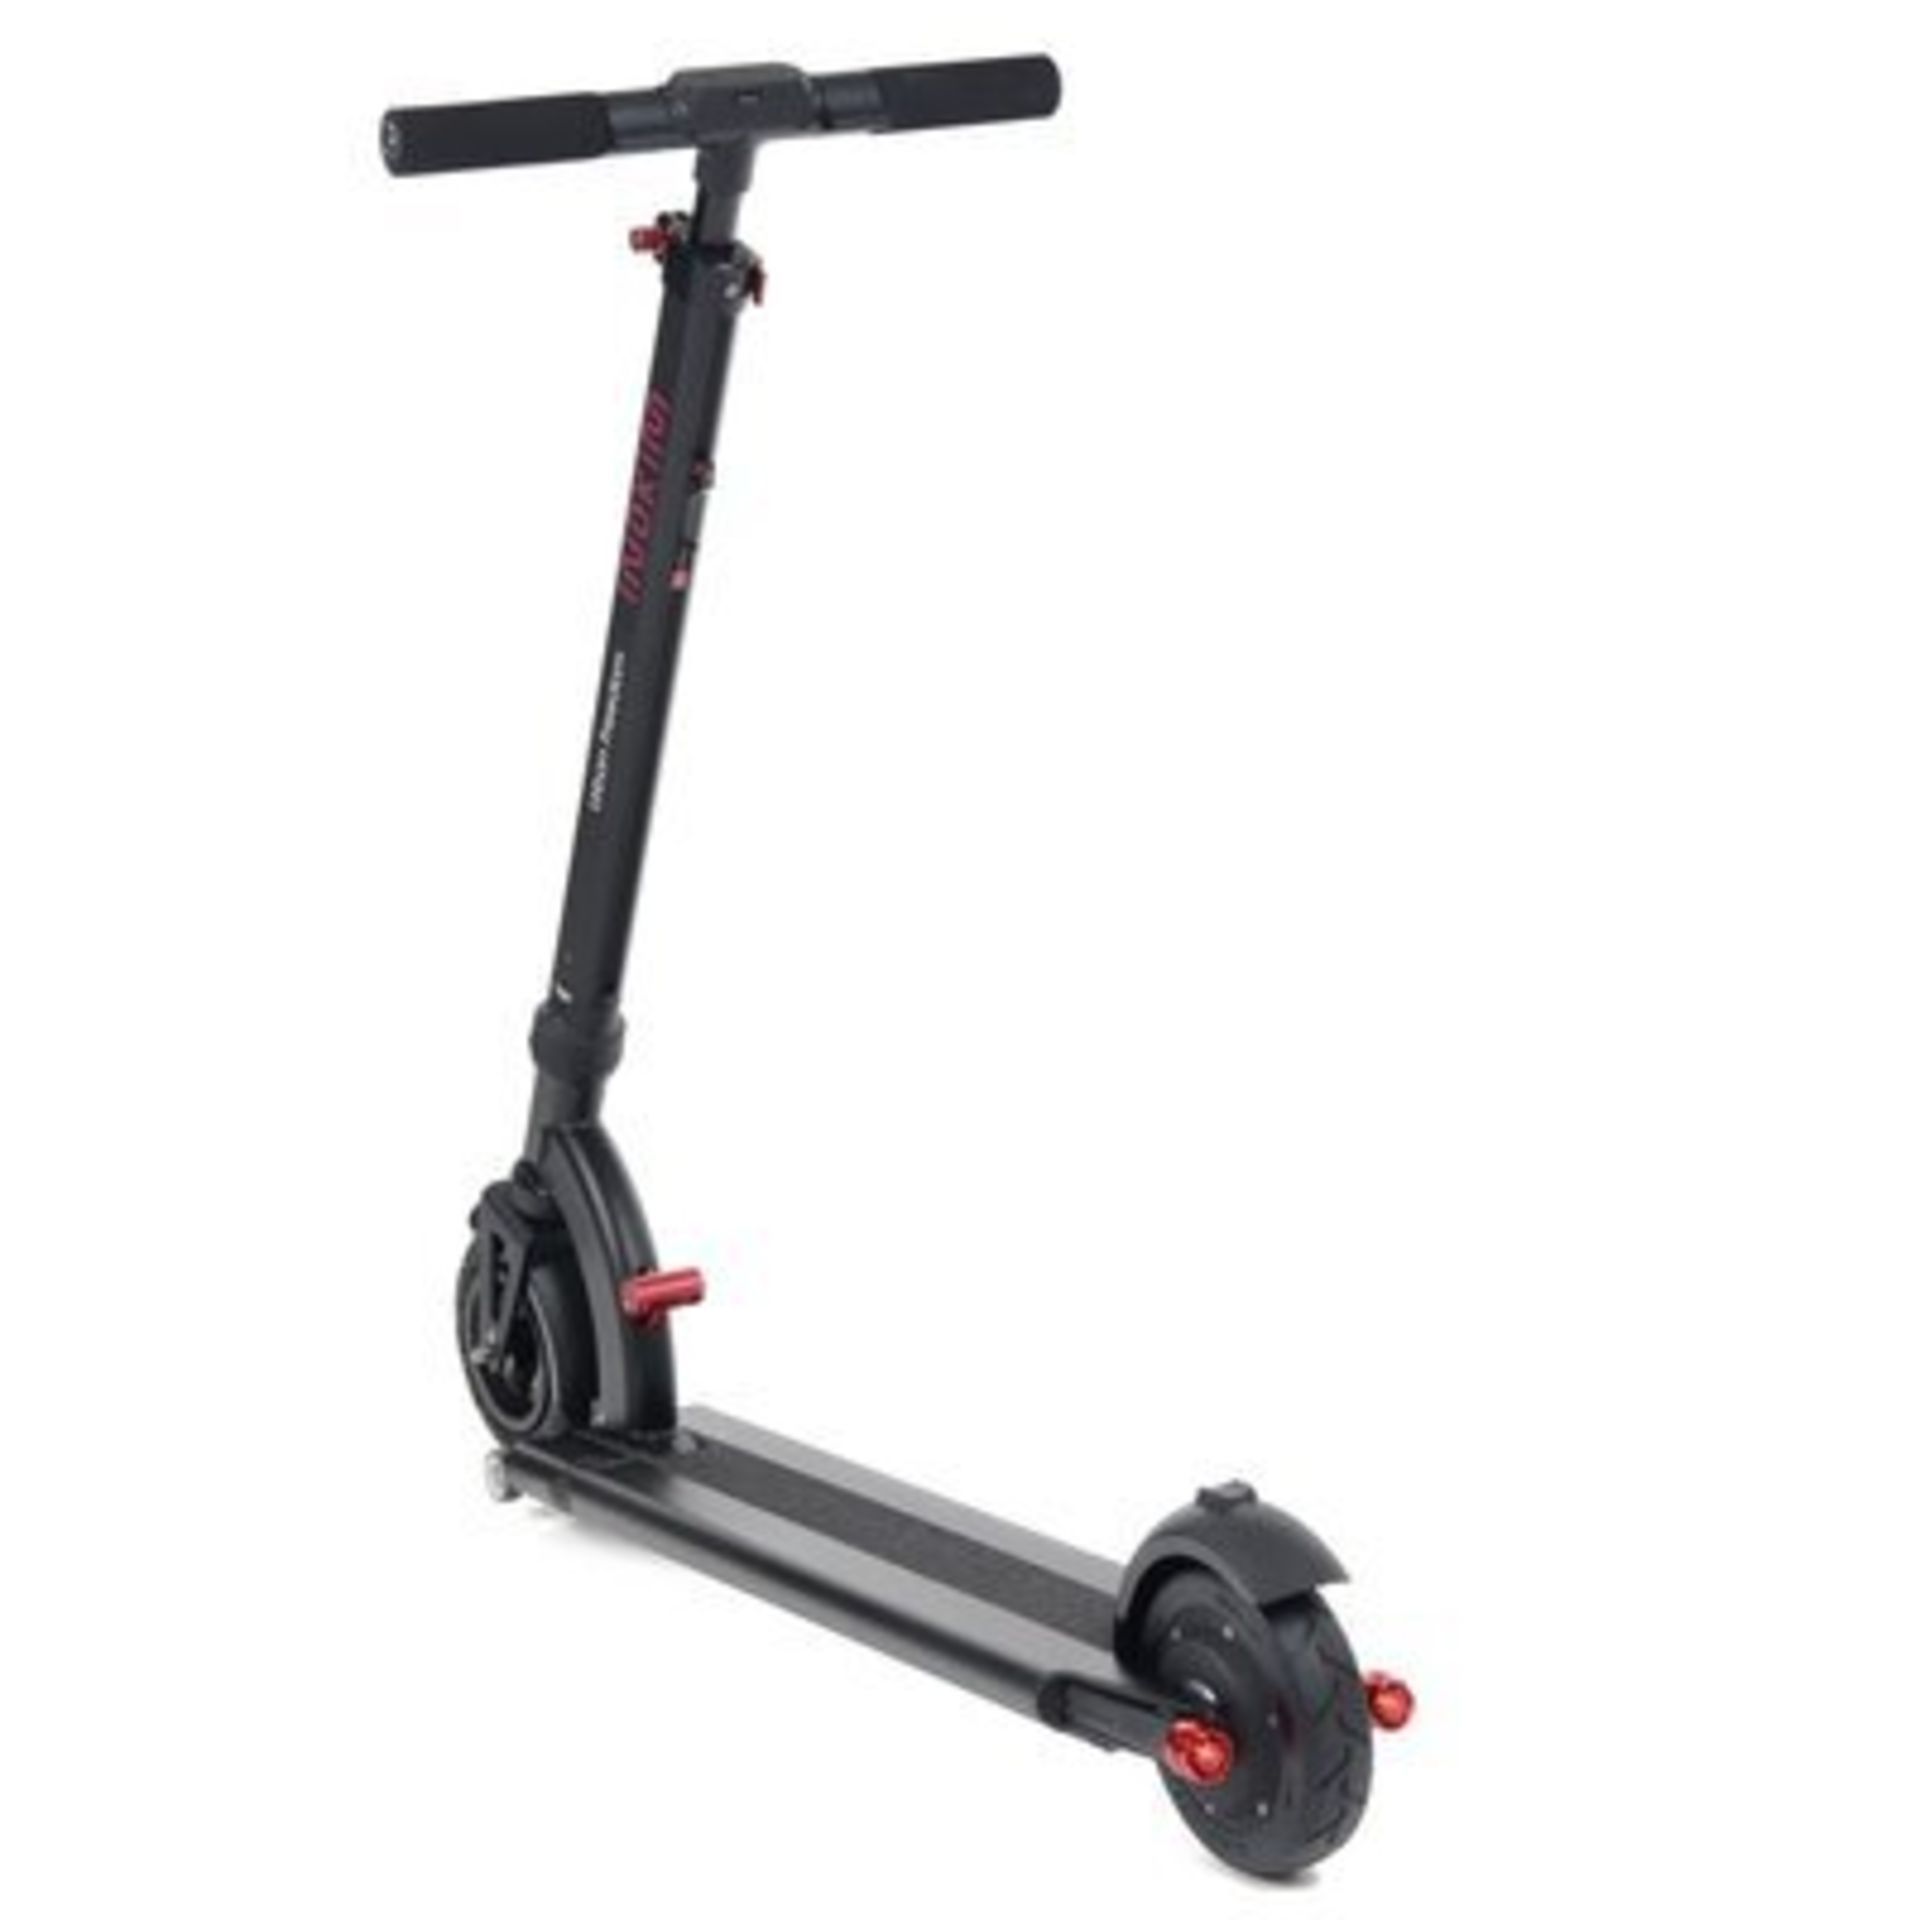 BRAND NEW NOKIM MINI FORCE BLACK 1'SELECTRIC SCOOTER (BLACK) RRP £559 - Image 2 of 2